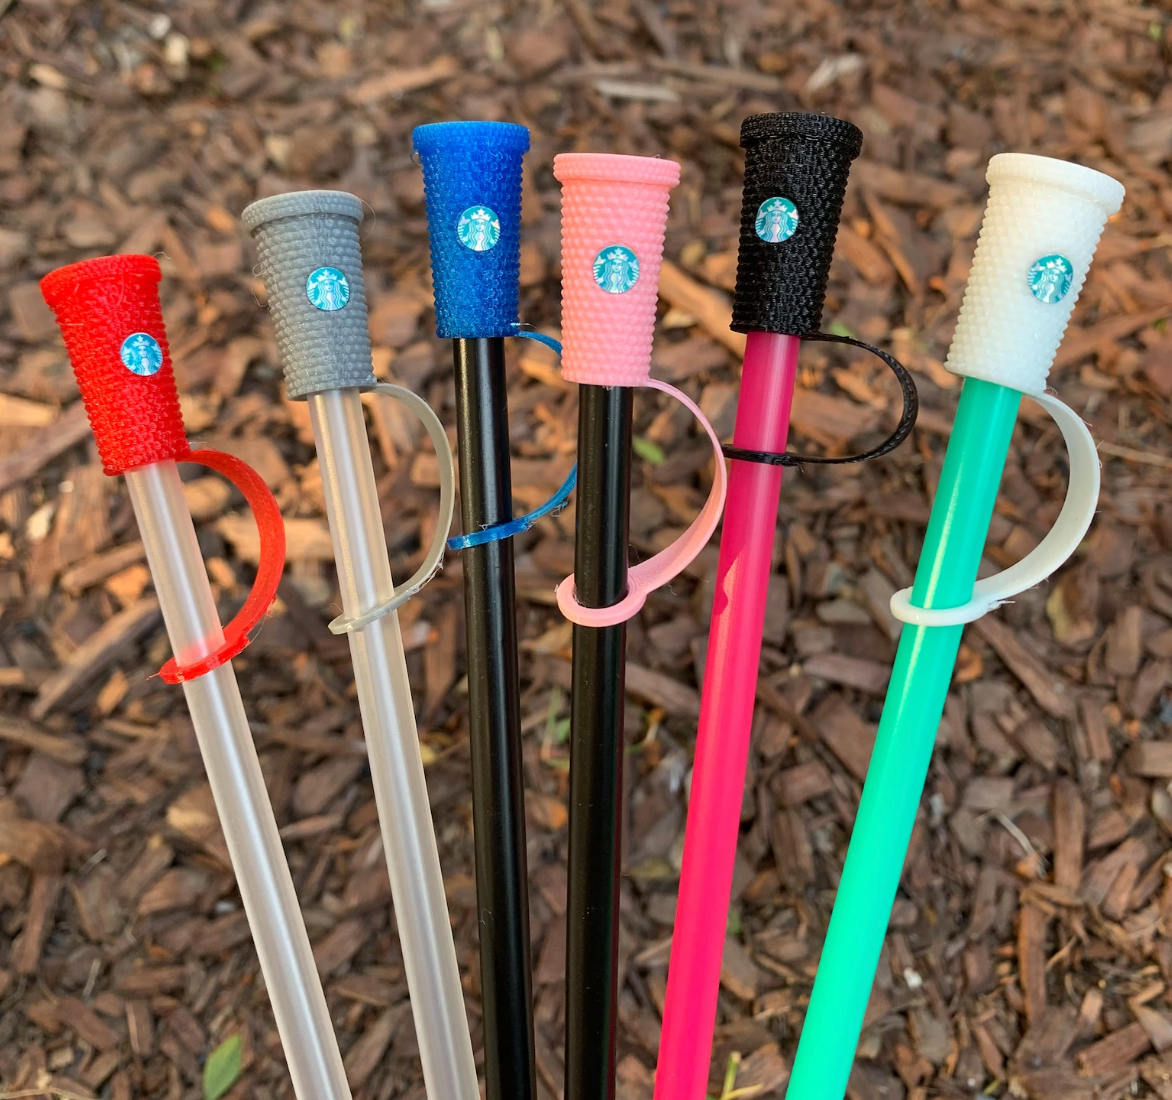 various straws with the starbucks cups inspired covers on them